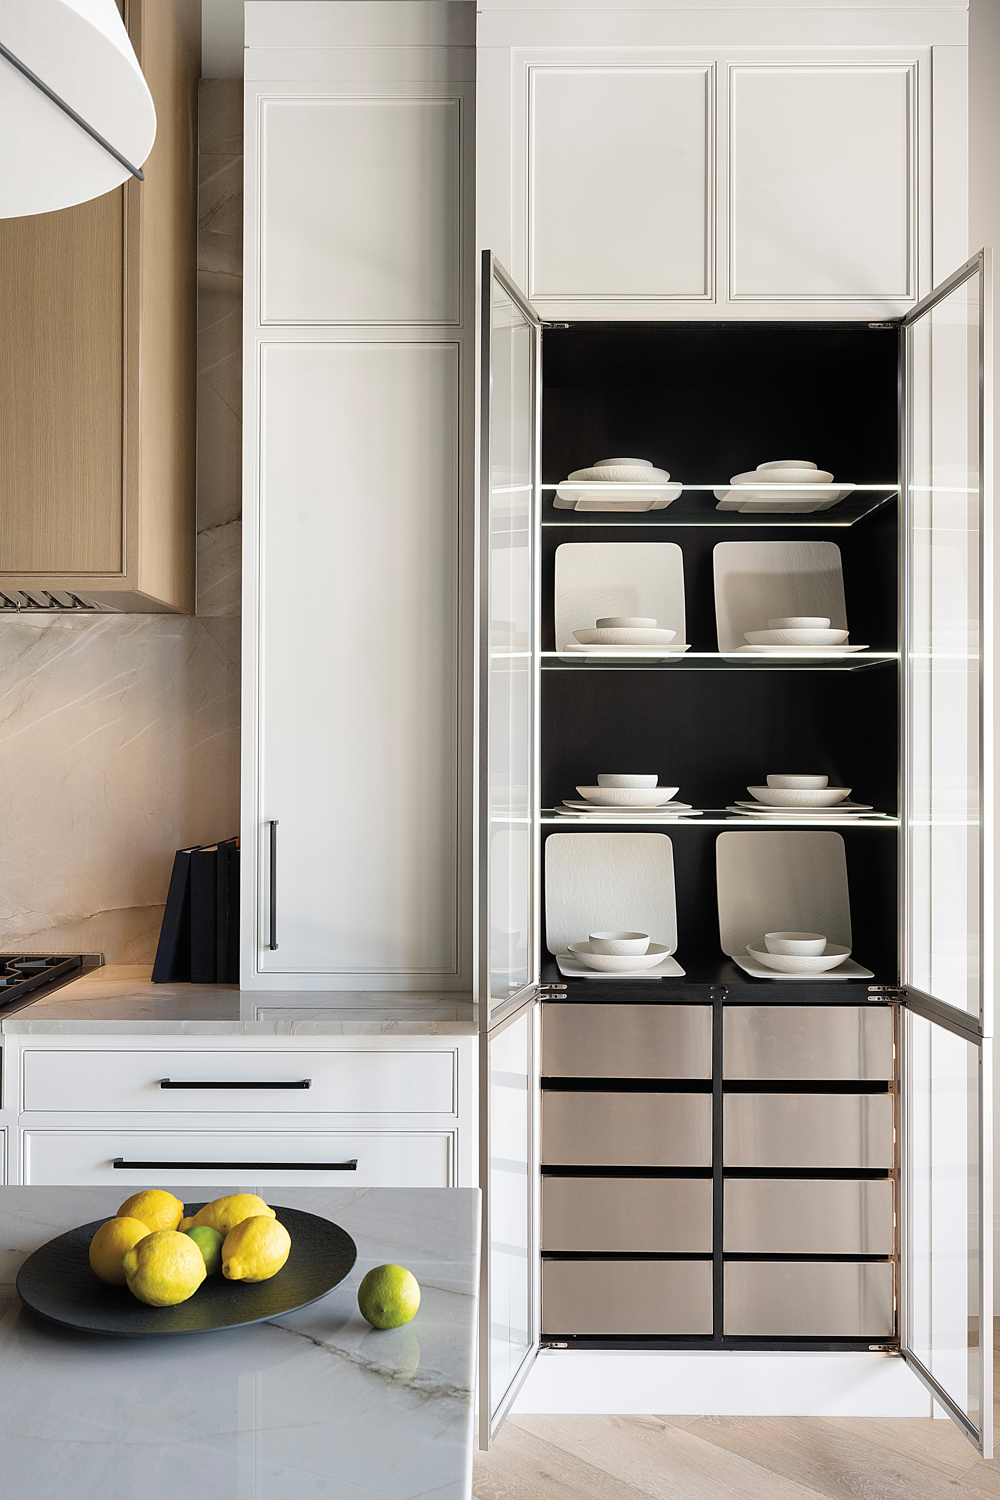 Kitchen vignette of white cabinetry and built-in shelving storage